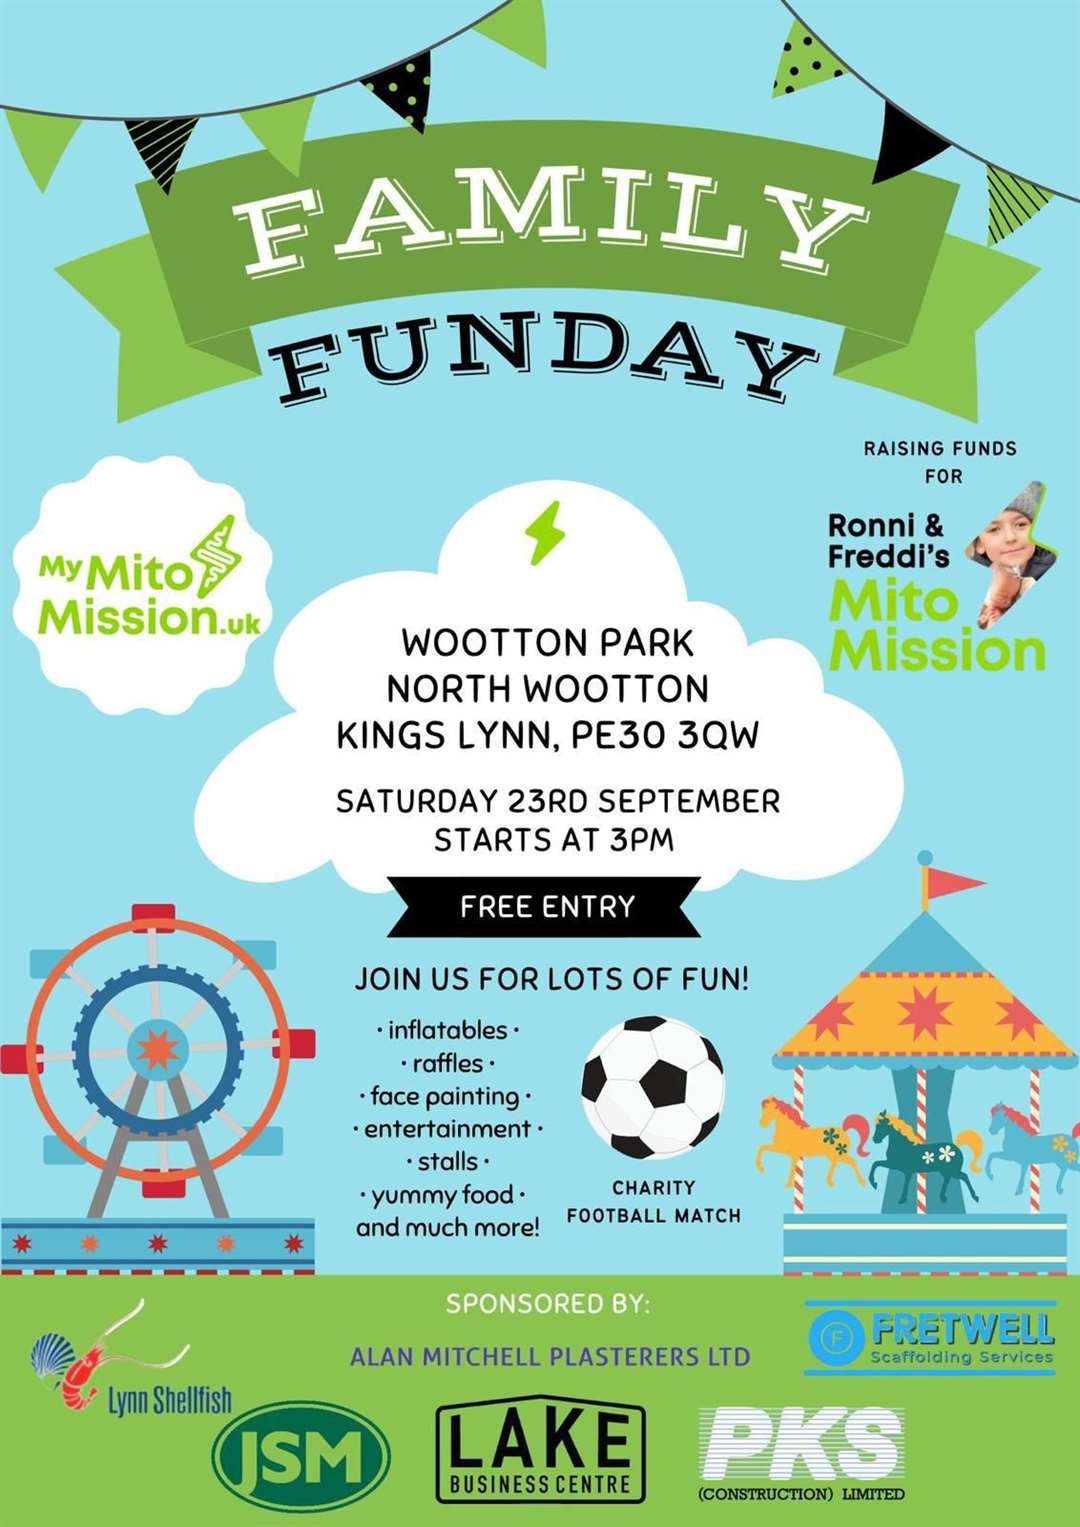 A family fun day is being held at Wootton Park this month to raise funds for Ronni and Freddi's Mito Mission and hopes to help find a cure